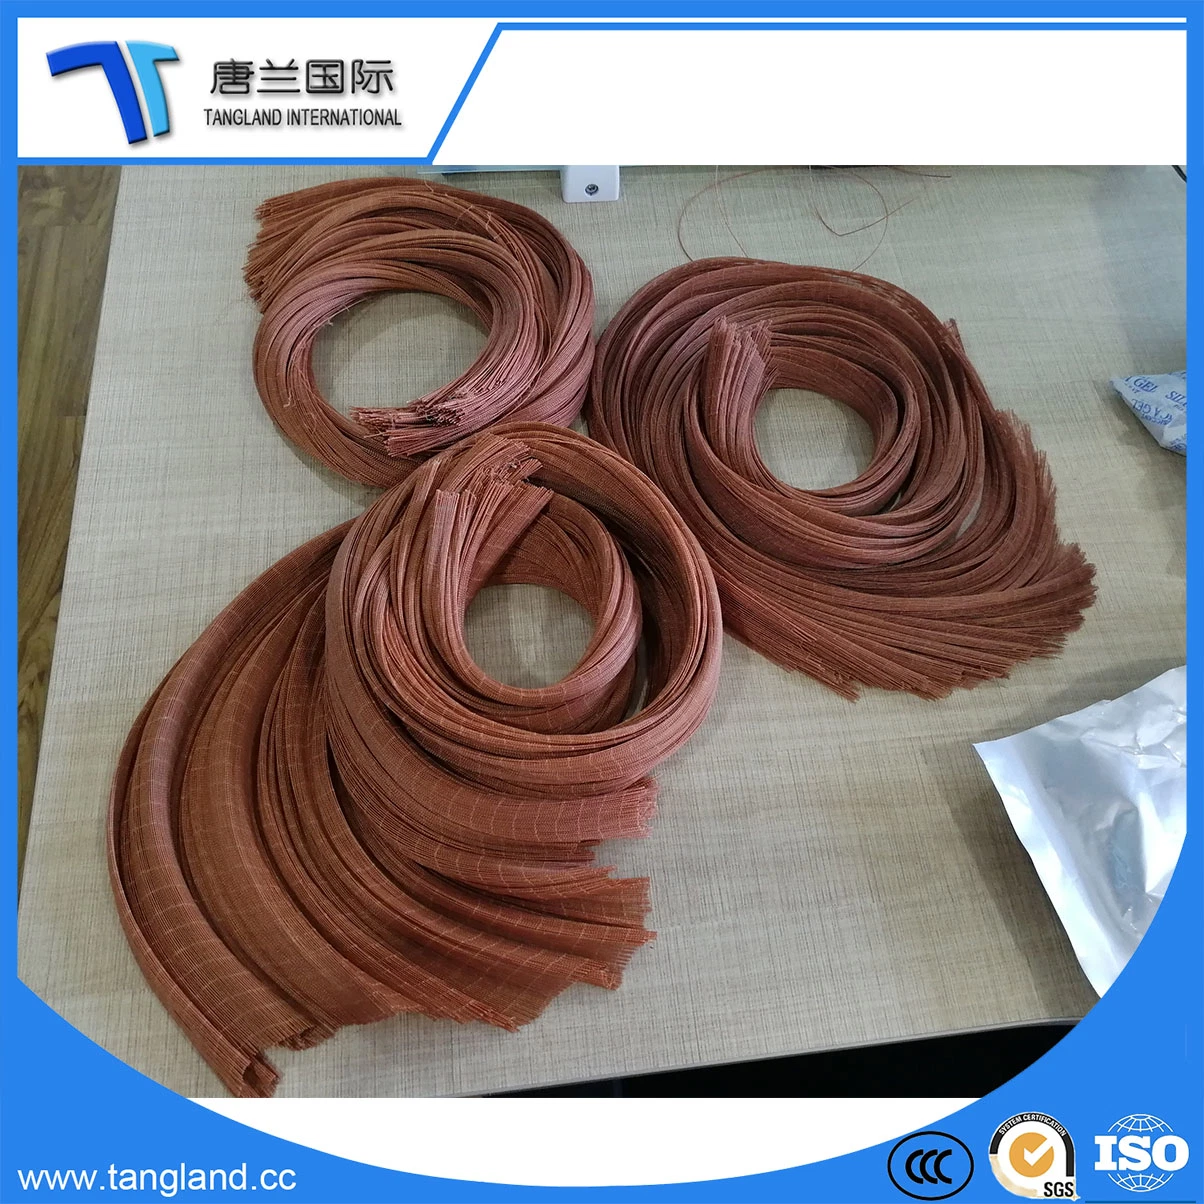 Nylon-6 Dipped Tyre Fabric Made of Multiply Yarn Widely Applicable